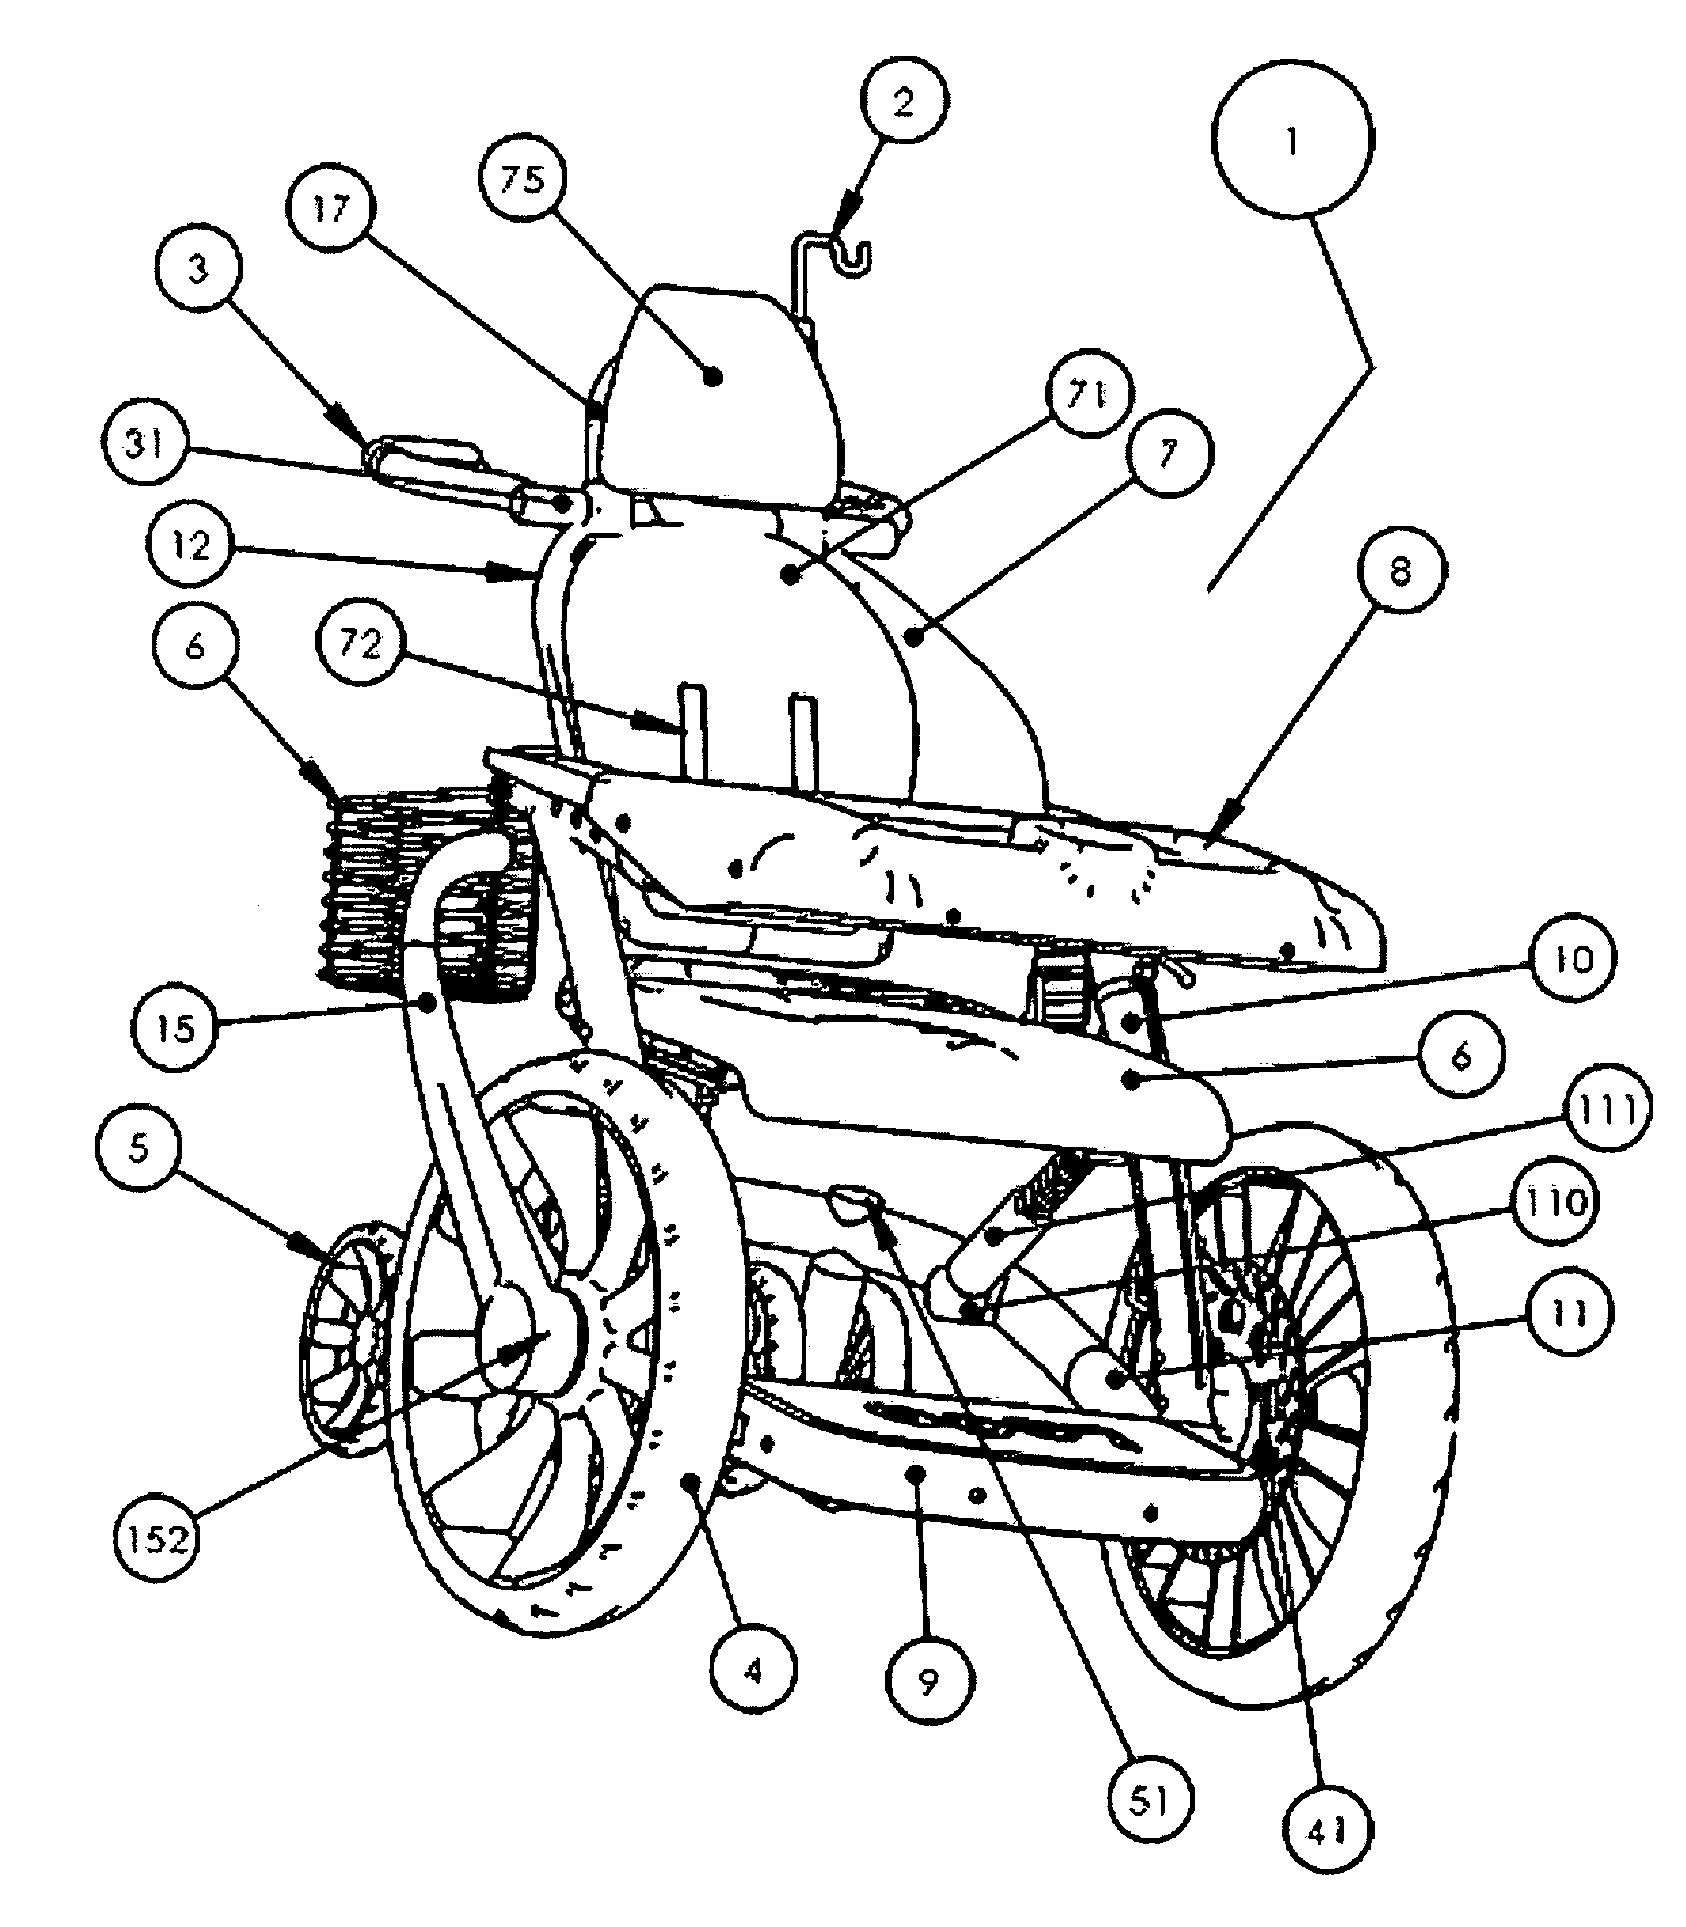 Adjustable adult mobility device